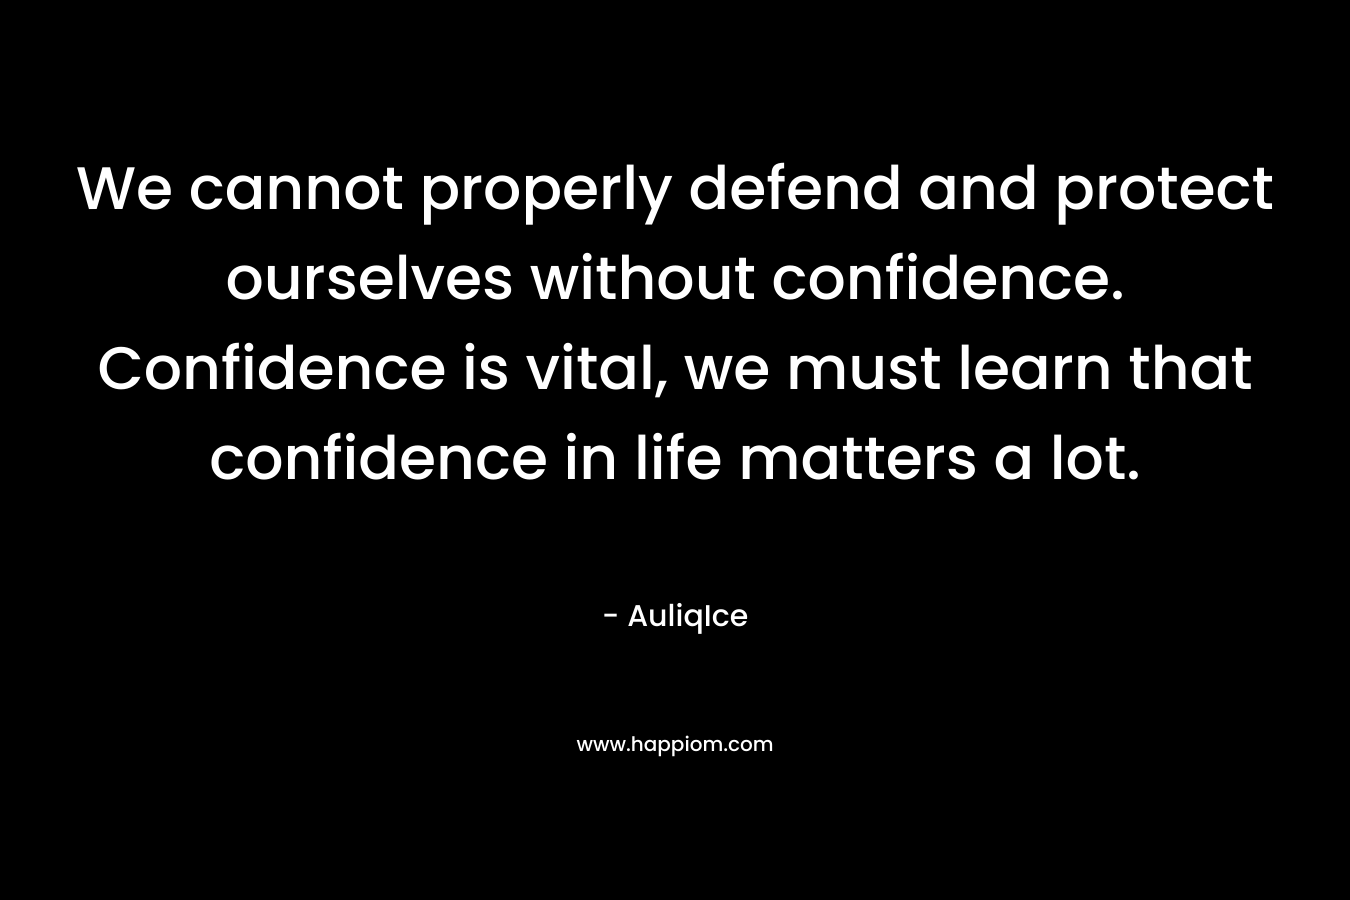 We cannot properly defend and protect ourselves without confidence. Confidence is vital, we must learn that confidence in life matters a lot.